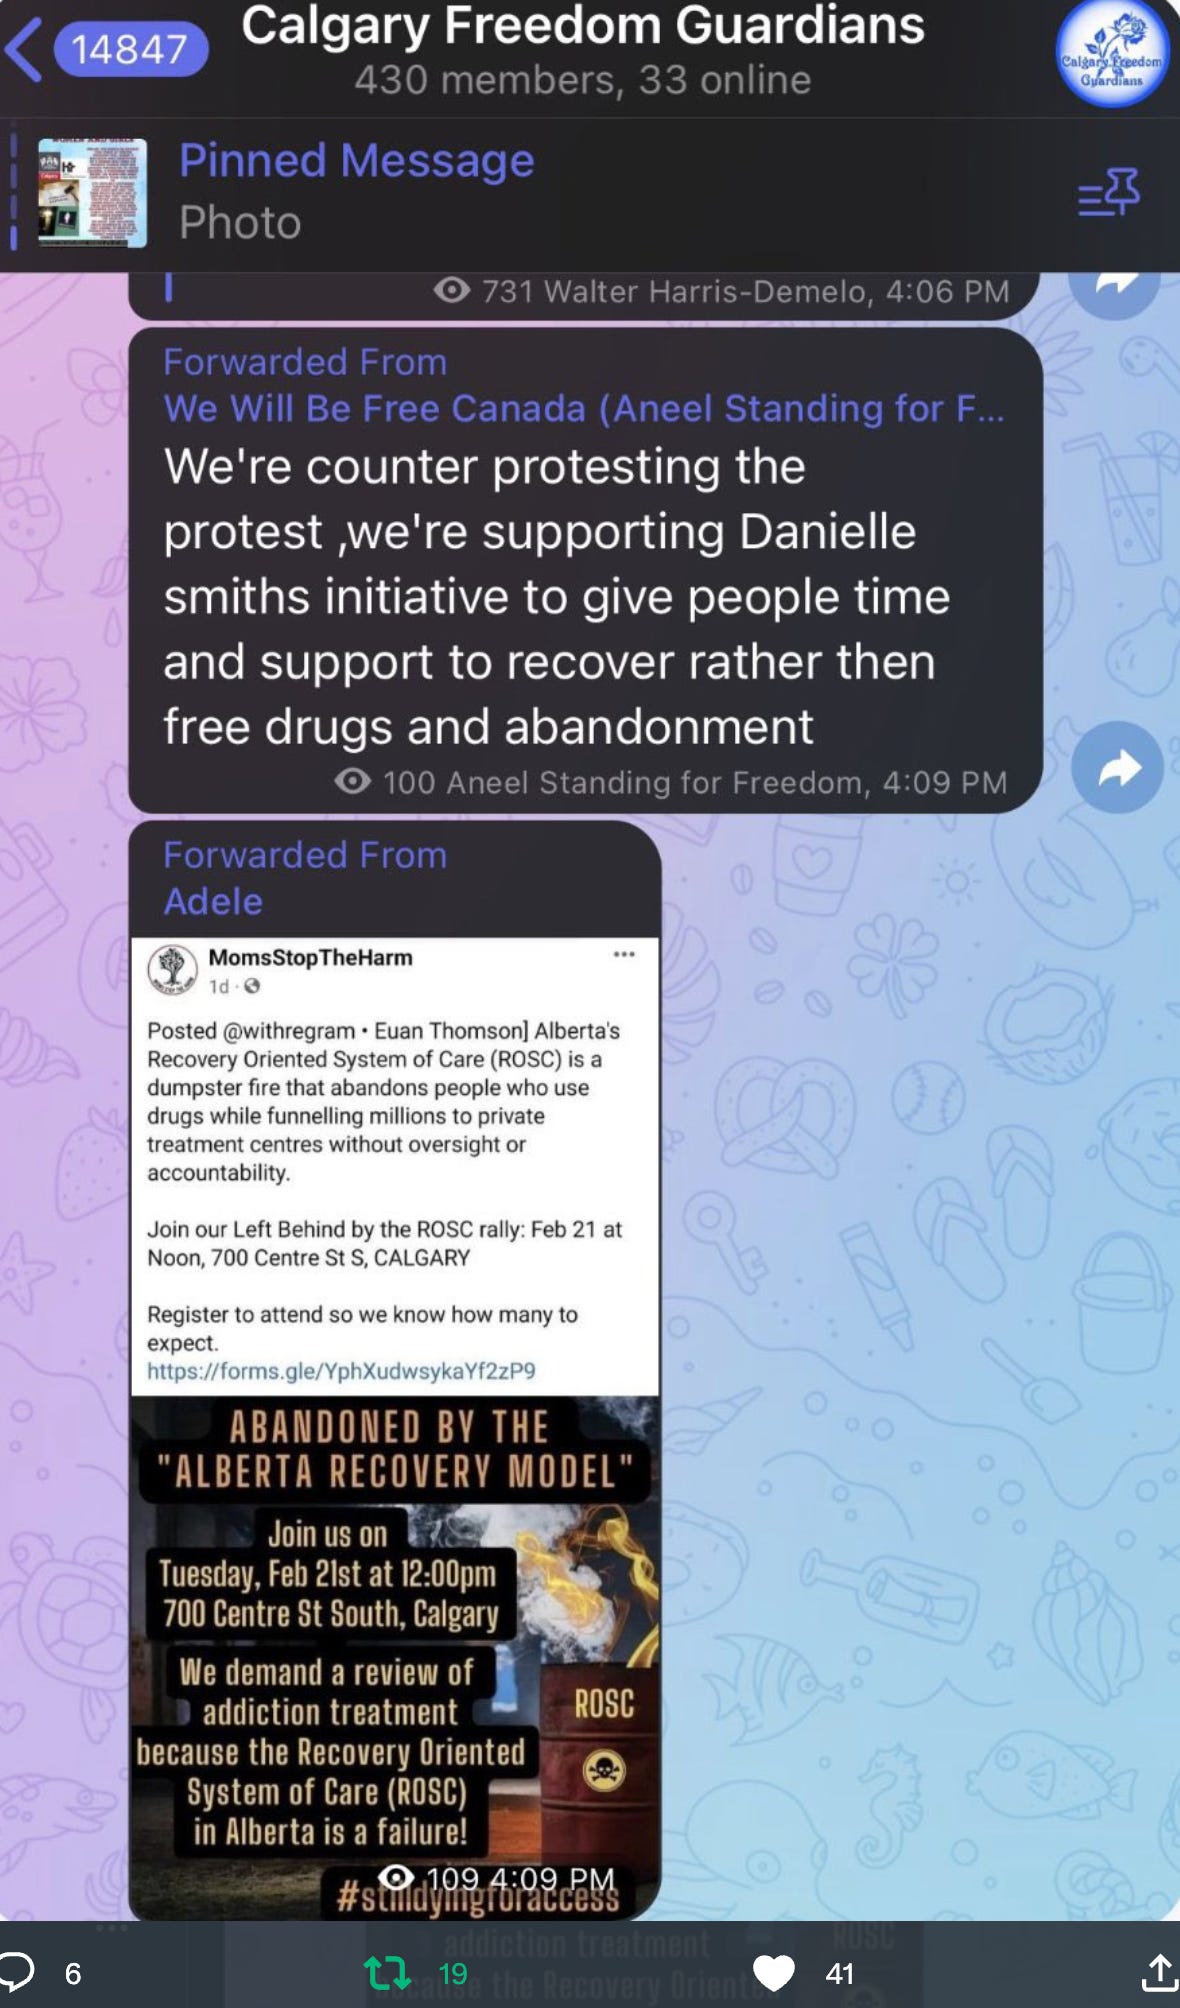 Telegram message from Calgary freedom guardians showing intention to counter protest our protest, in support of Daniel Smith's initiative to give people time and support to recover rather than free drugs and abandonment. The site a post about the protest by moms stop the harm. the telegram post has 19 reposts and 41 likes.